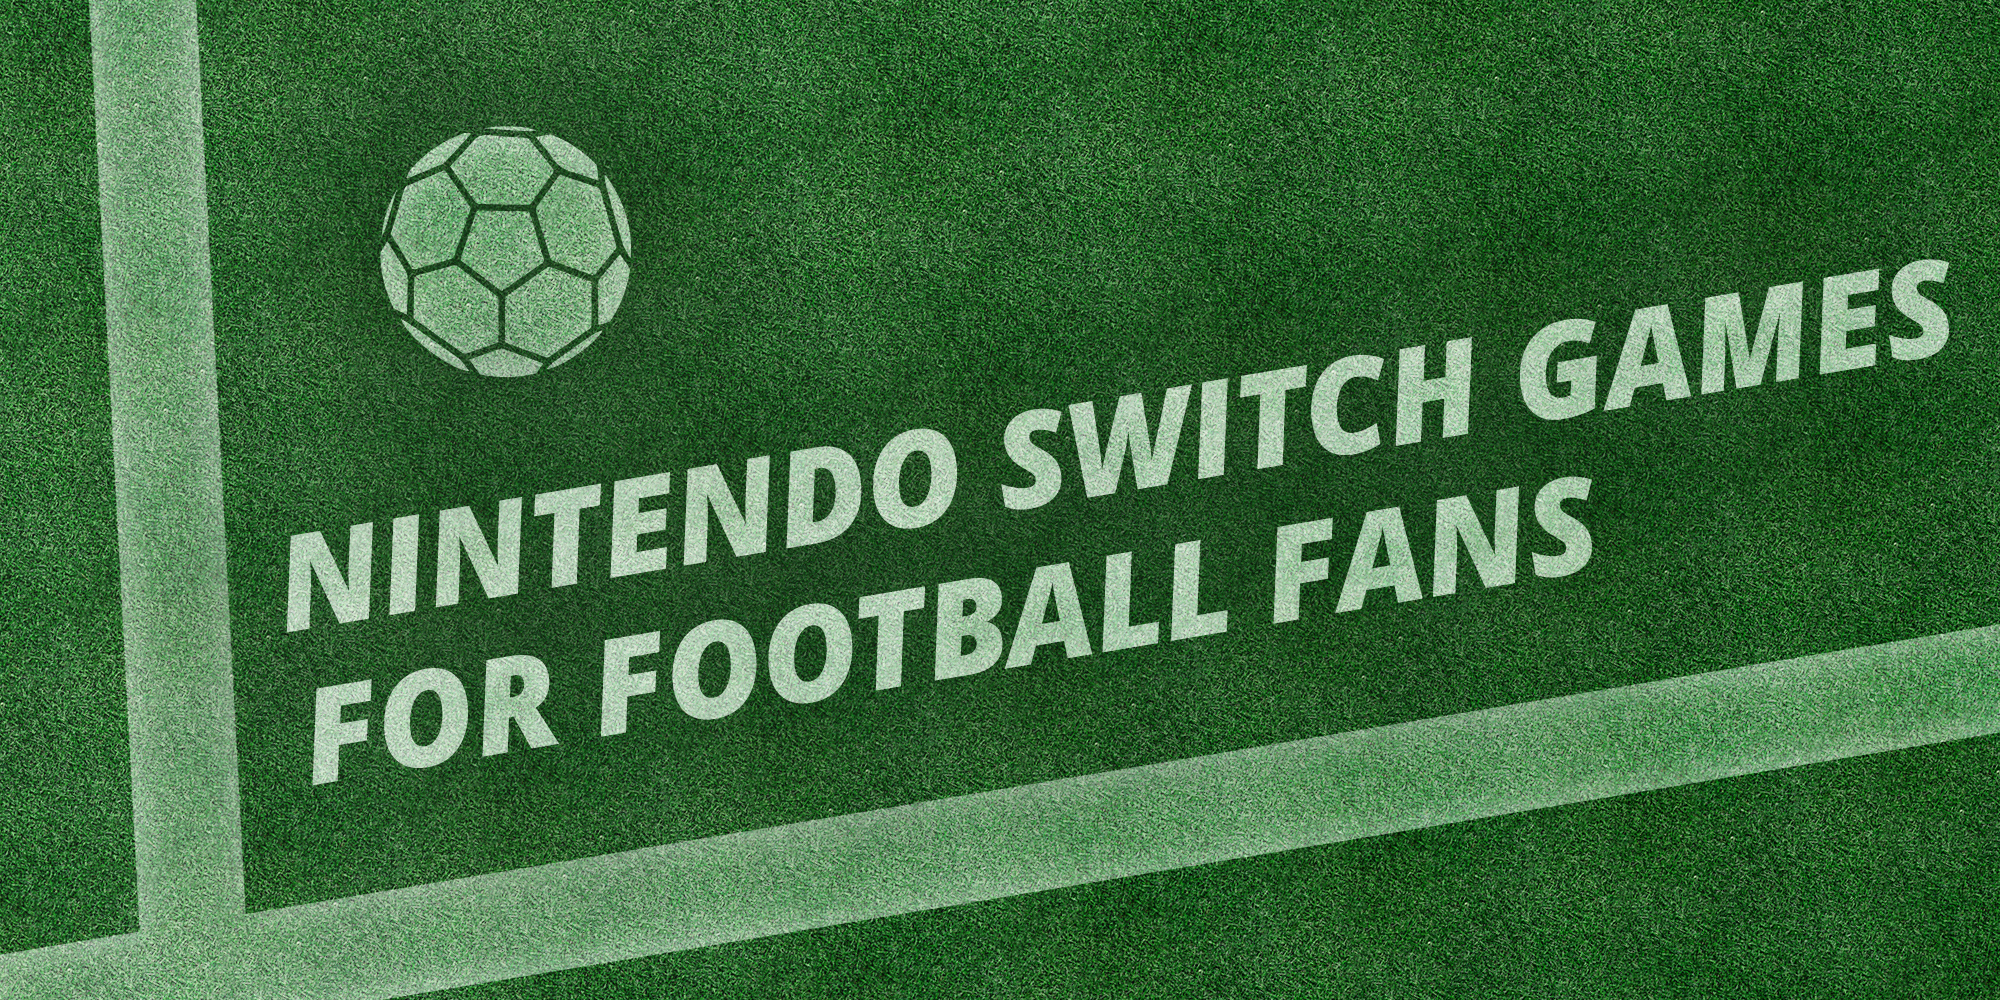 Nintendo Switch games for football fans